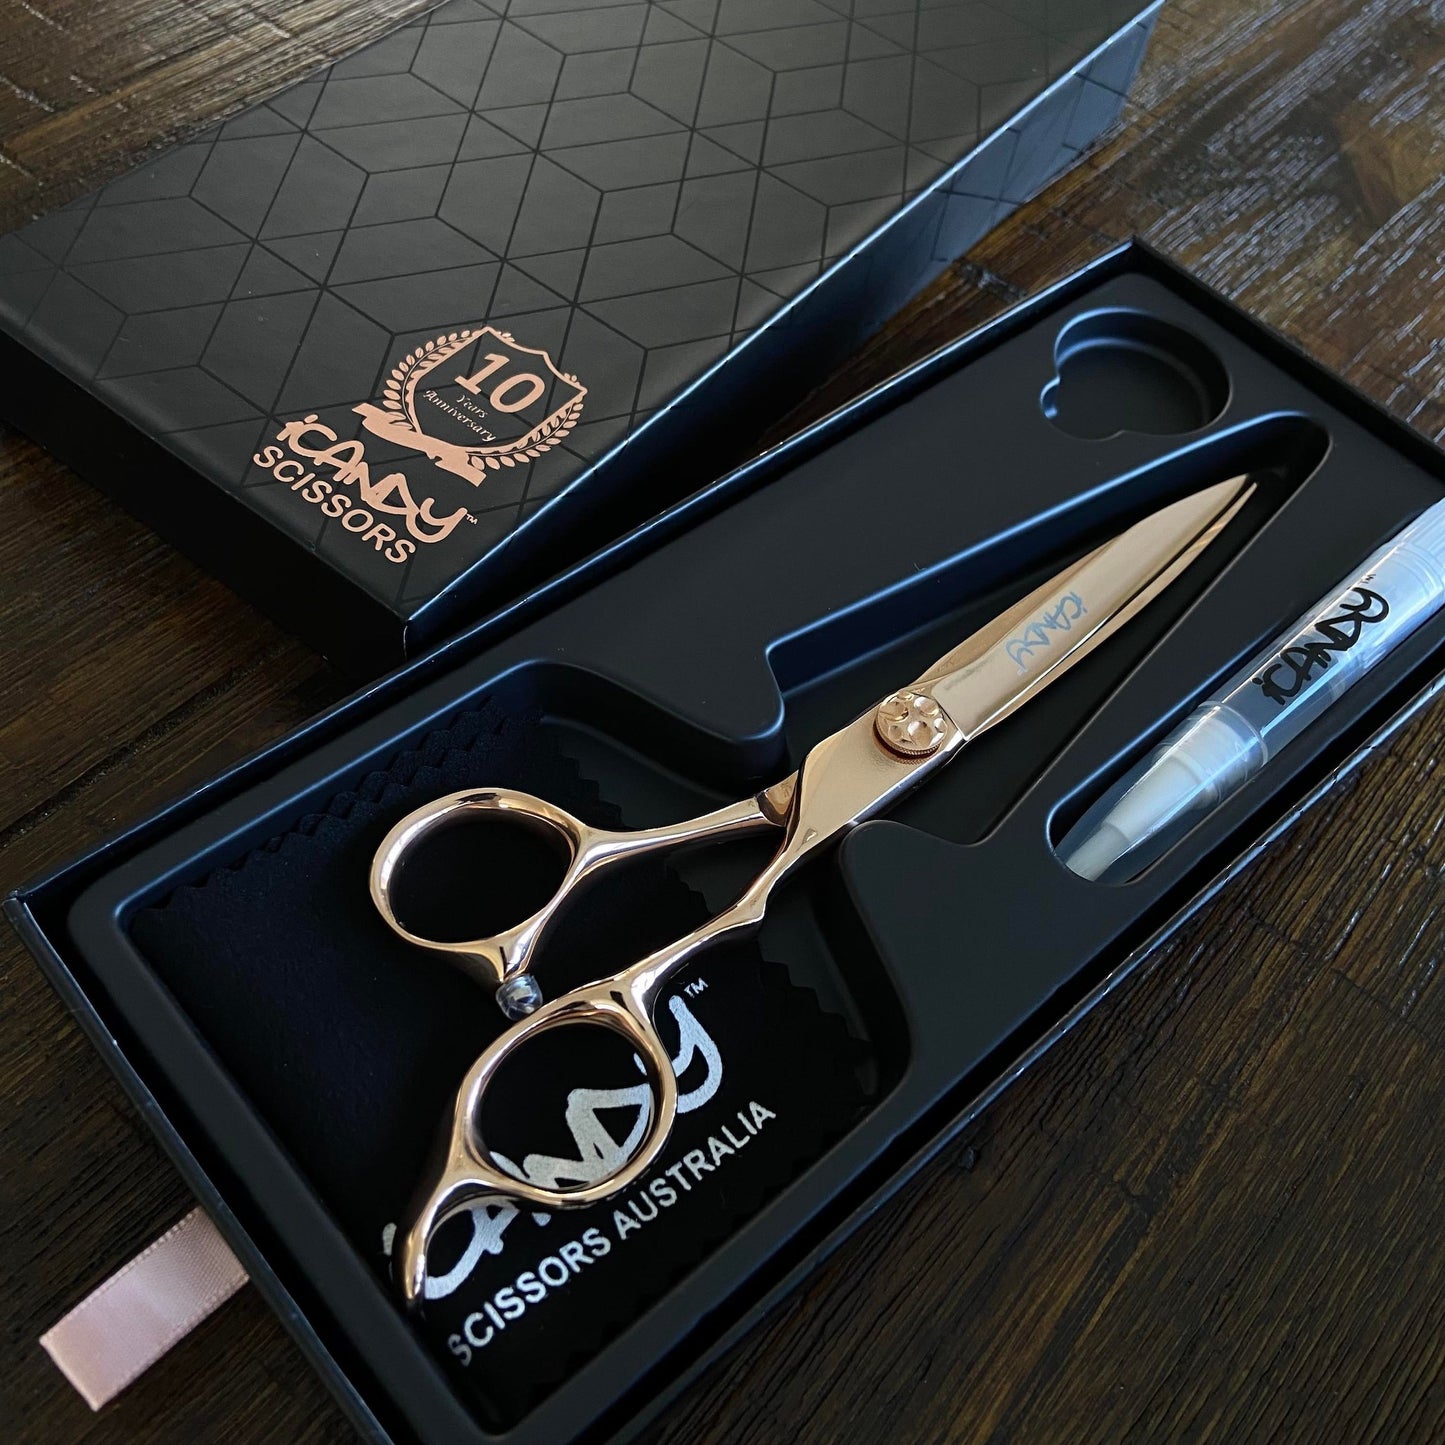 iCandy Sword Rose Gold VG10 6.6" 10 Years Anniversary Edition Scissors Open Box